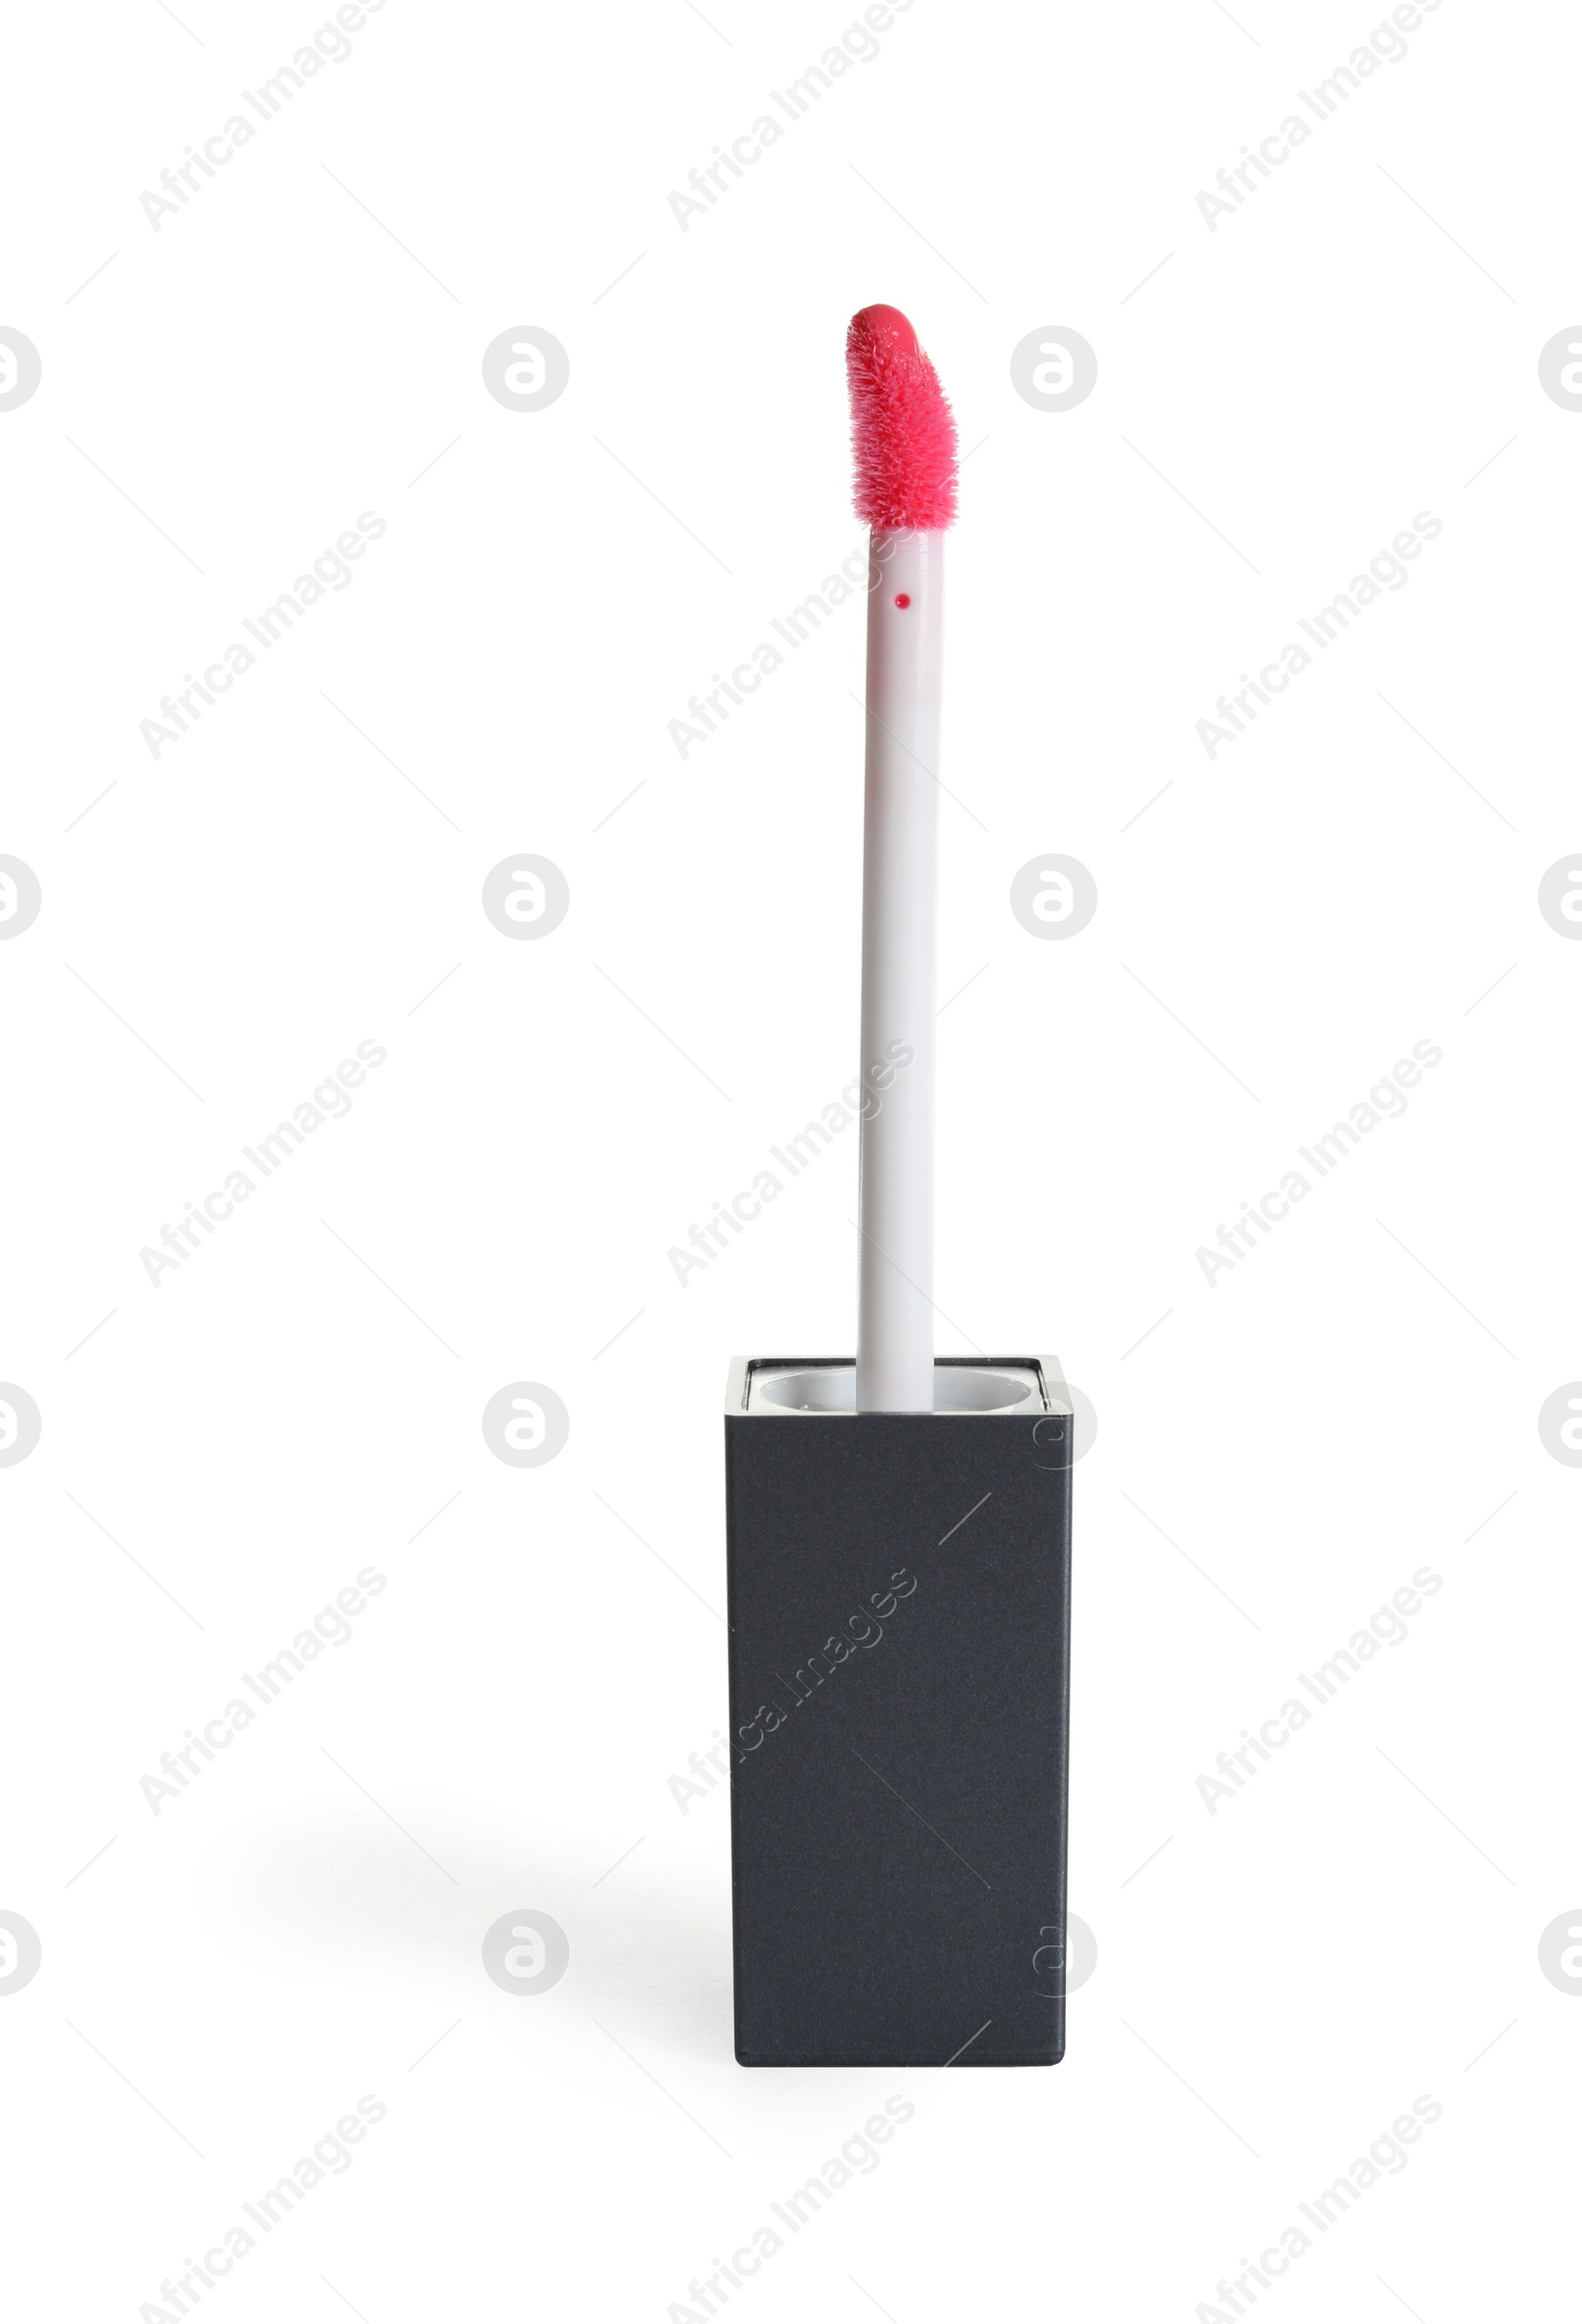 Photo of Applicator with liquid lipstick isolated on white